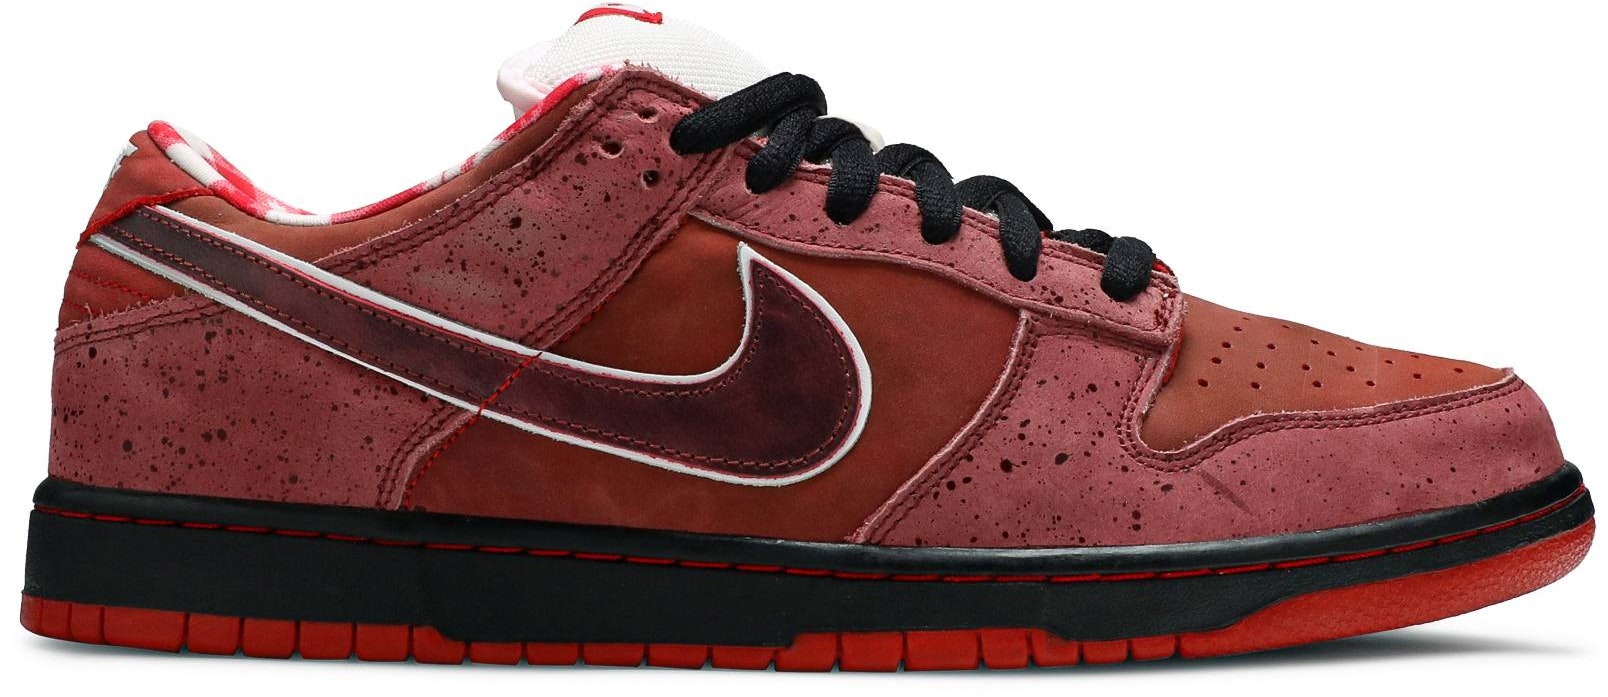 Nike Dunk SB Red Lobster